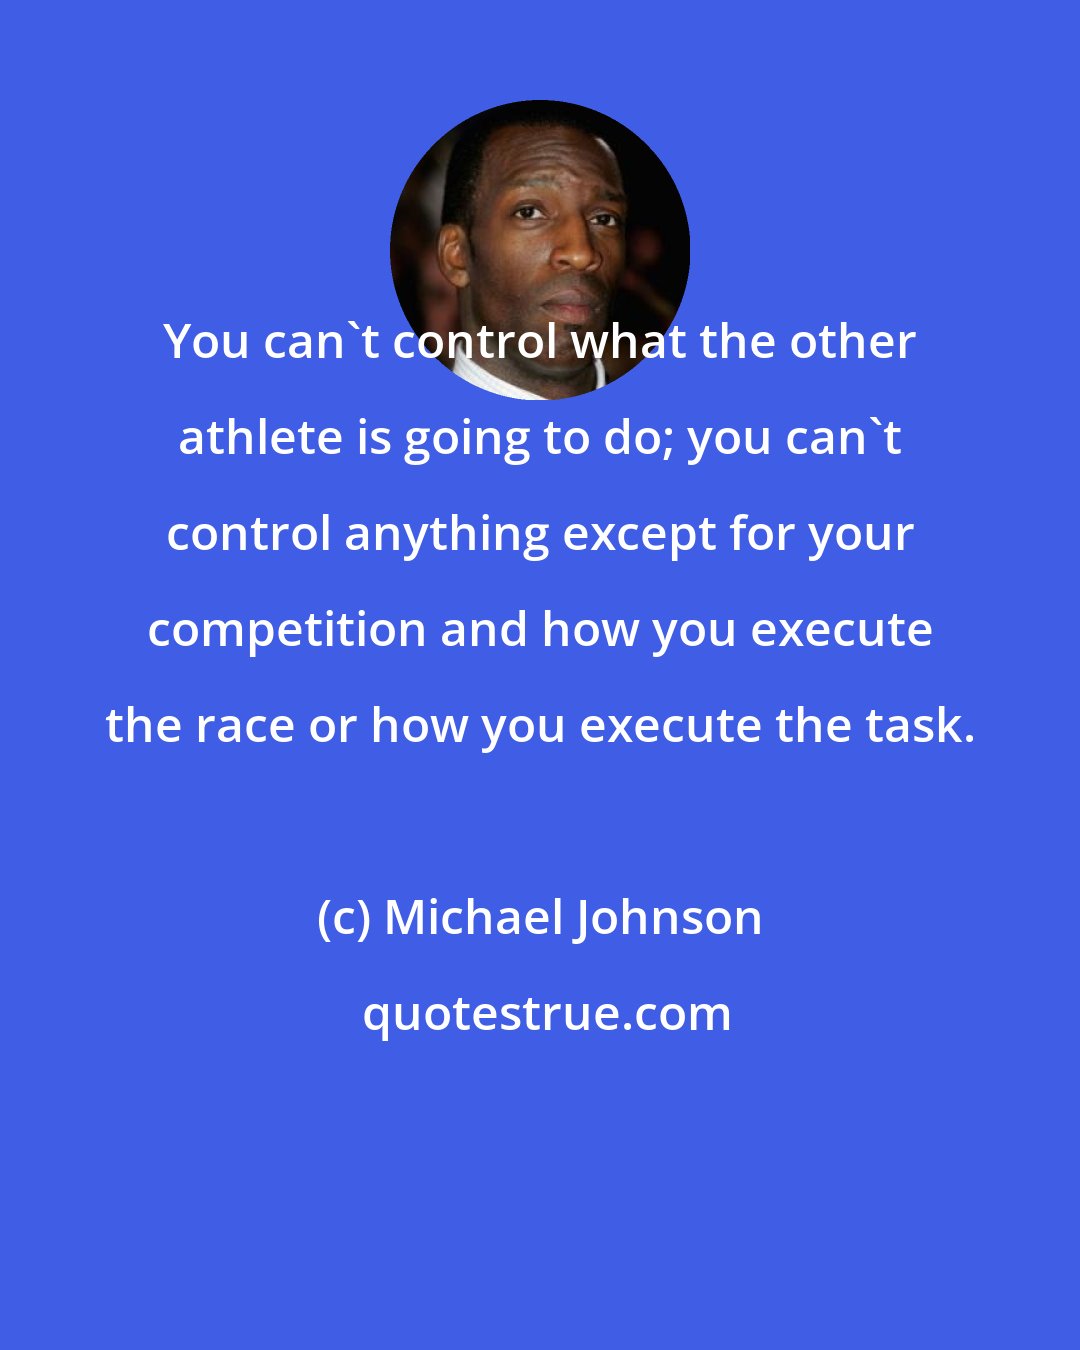 Michael Johnson: You can't control what the other athlete is going to do; you can't control anything except for your competition and how you execute the race or how you execute the task.